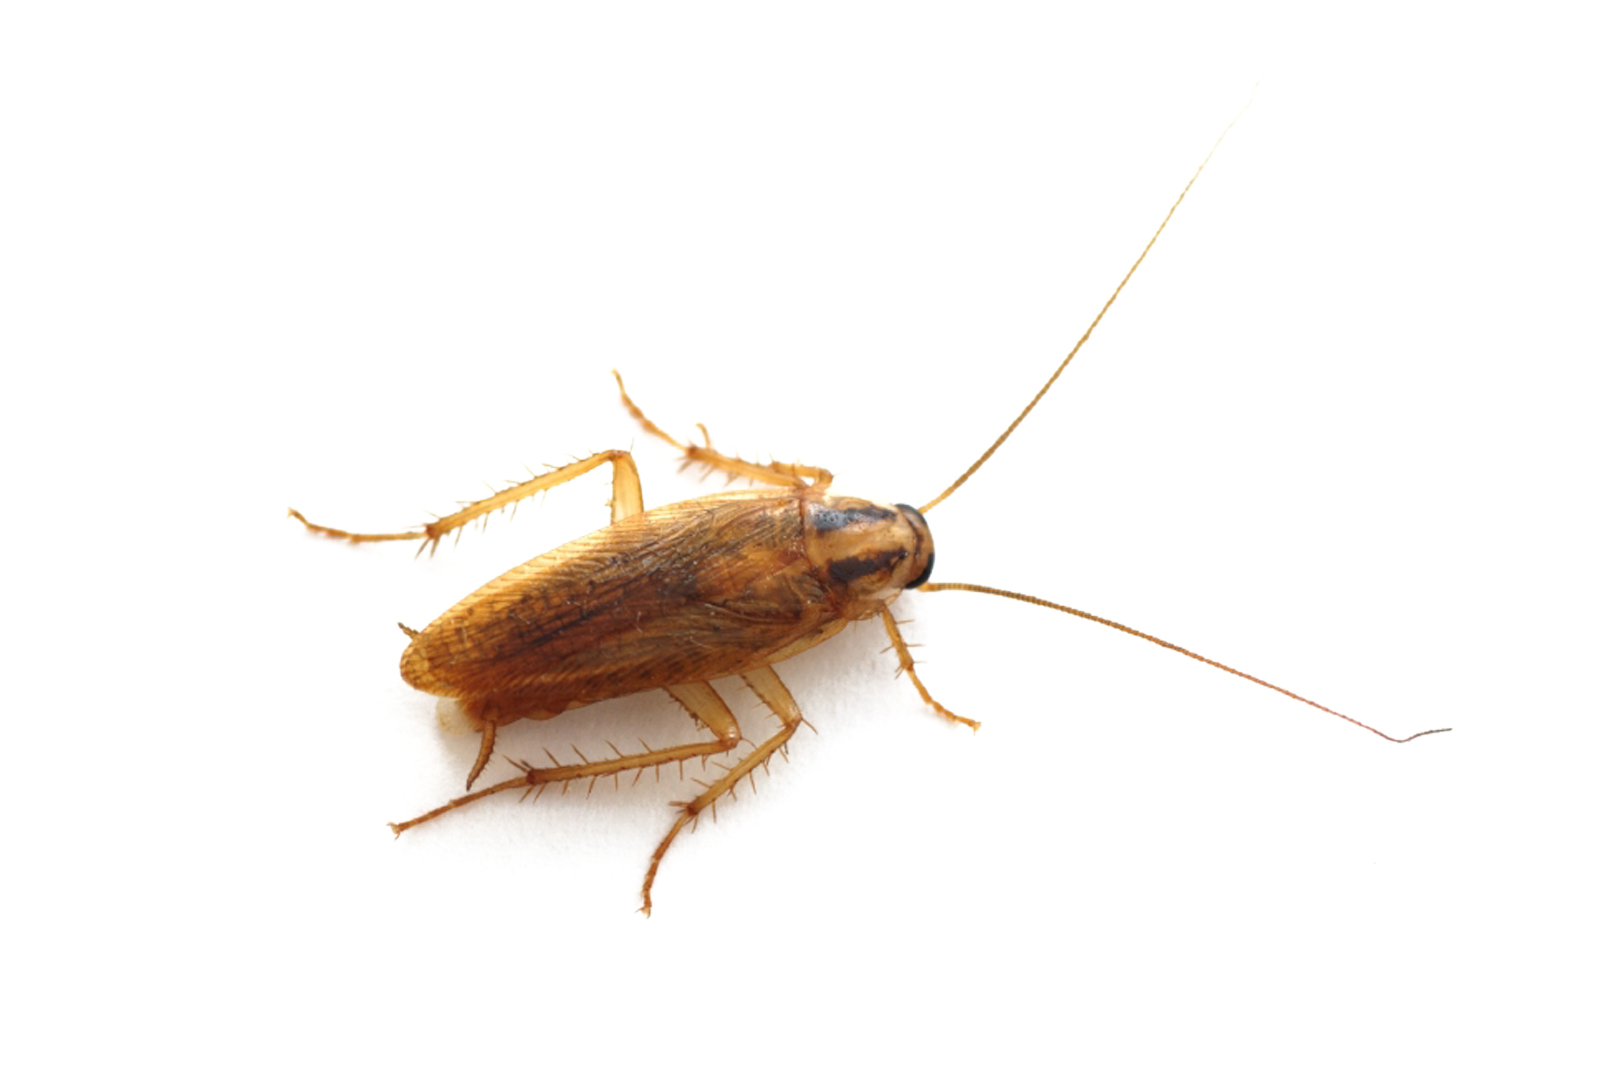 COMMON PESTS IN MIDDLE TENNESSEE